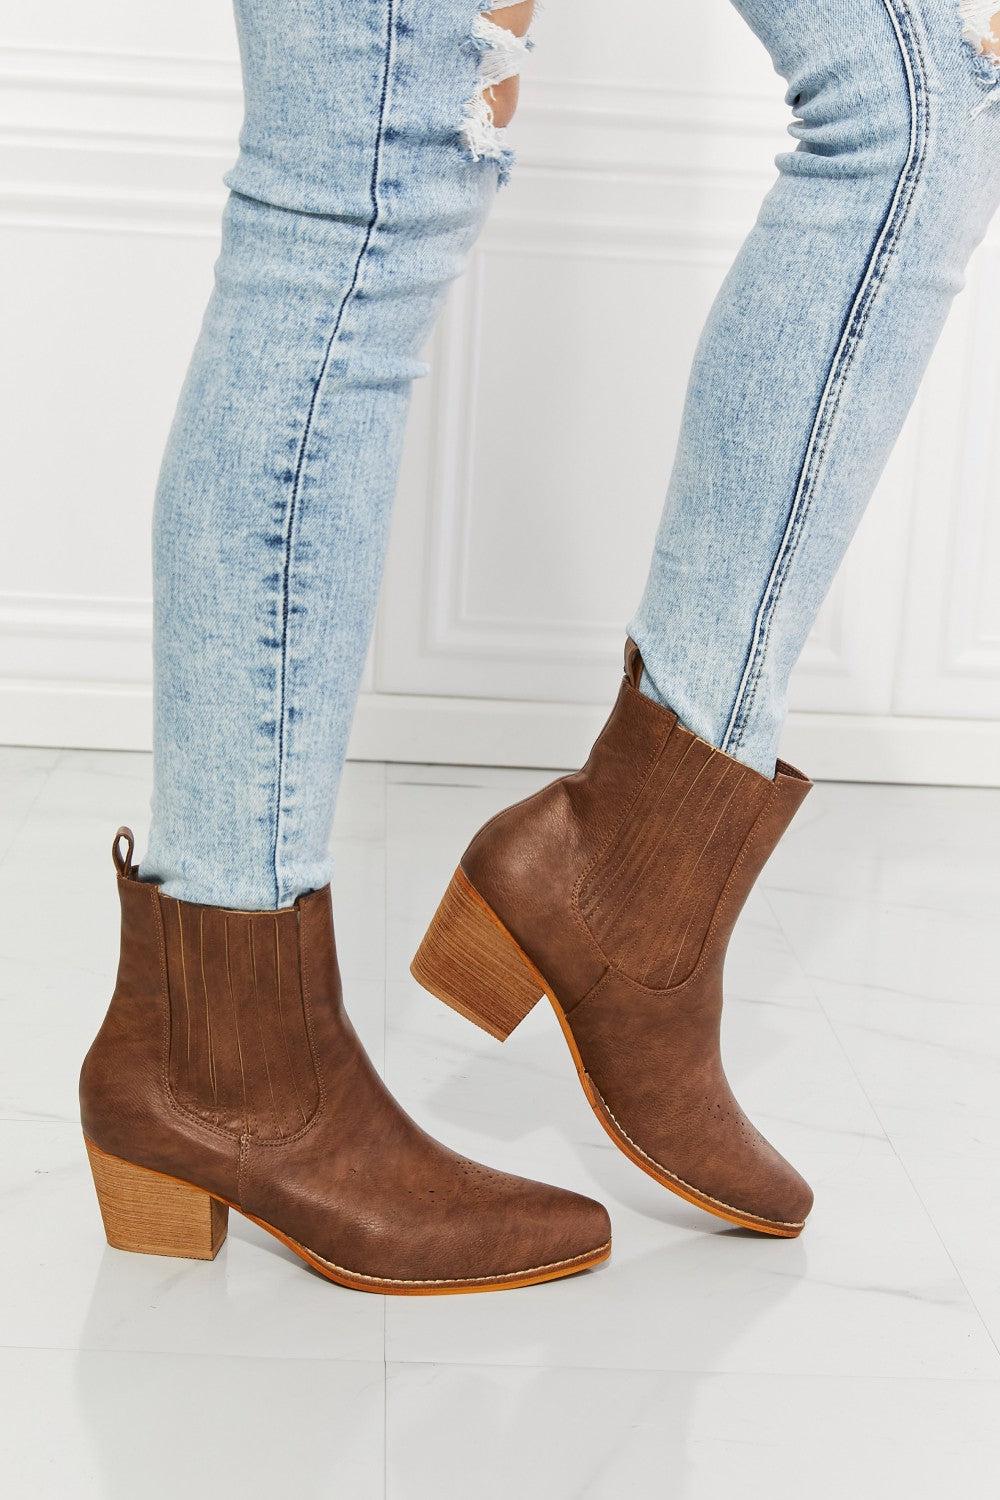 MMShoes Love the Journey Stacked Heel Chelsea Boot in Chestnut BLUE ZONE PLANET